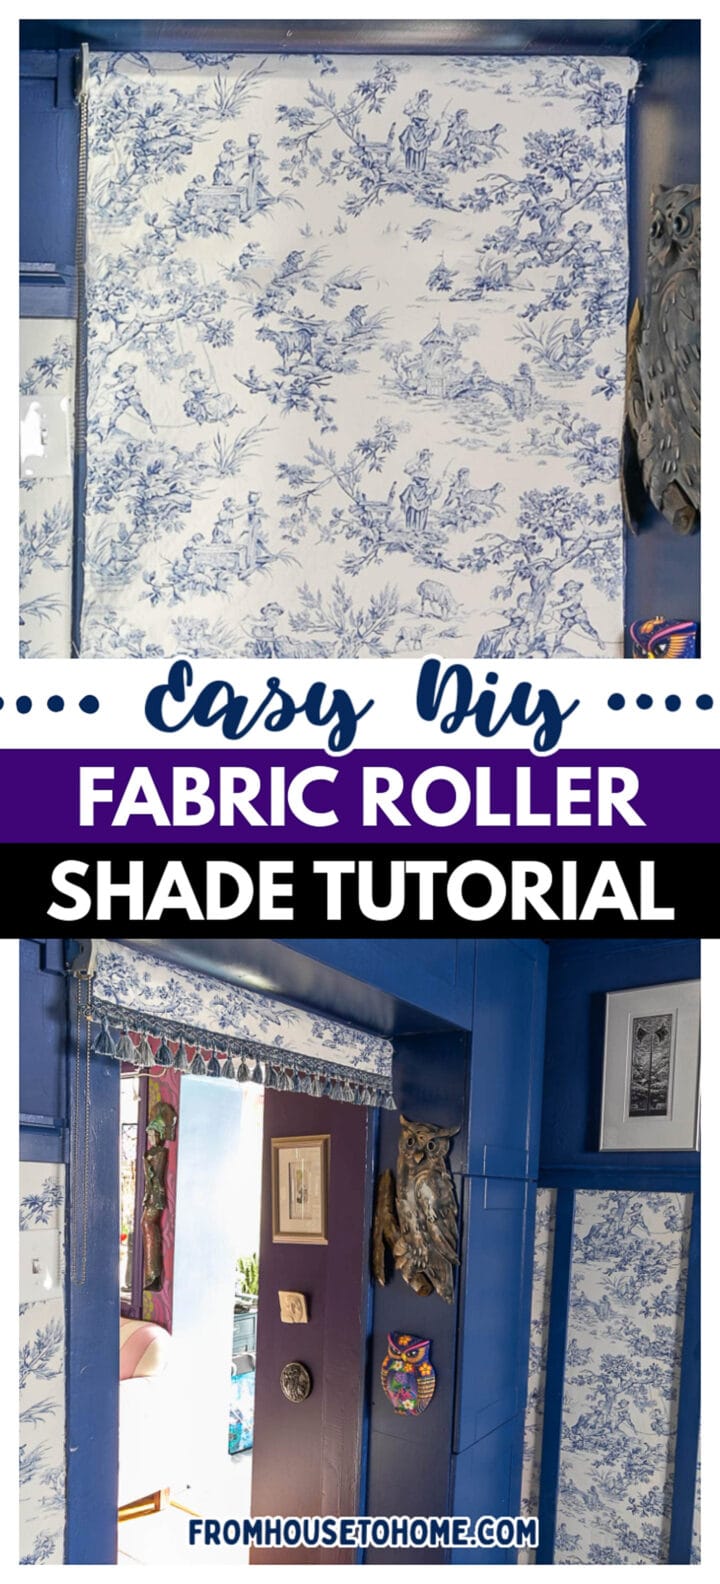 How To Make A DIY Fabric roller shade